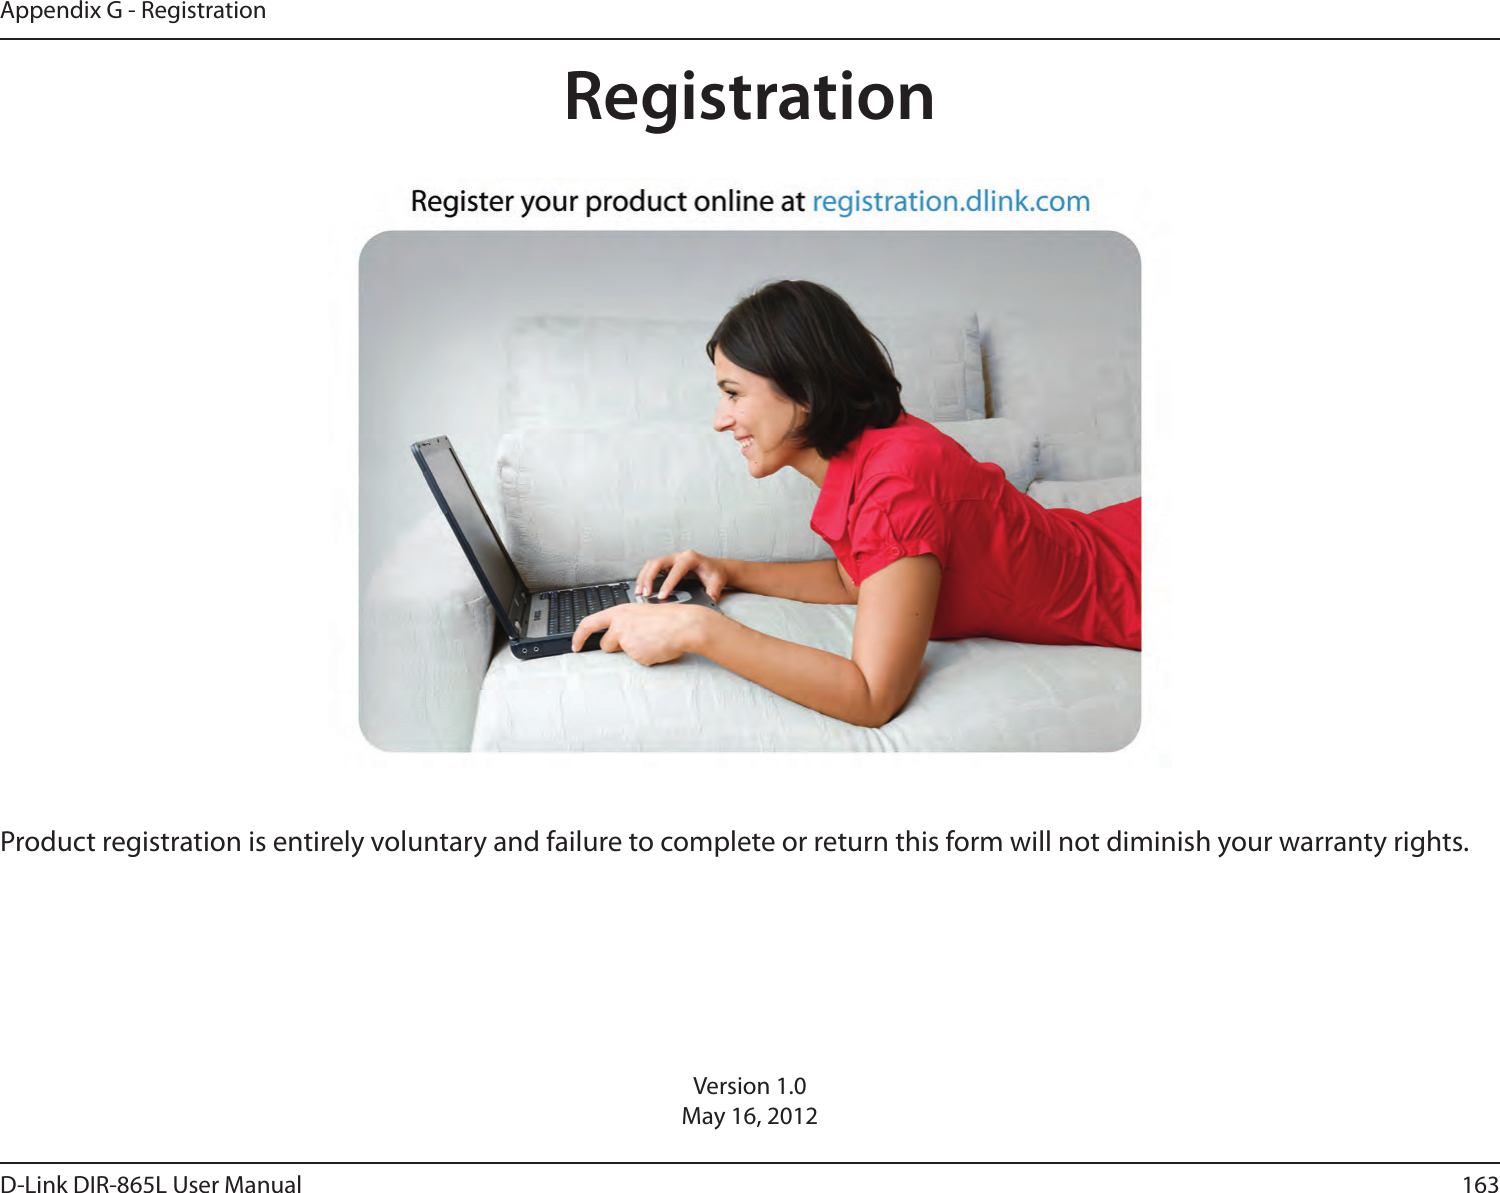 163D-Link DIR-865L User ManualAppendix G - RegistrationVersion 1.0May 16, 2012Product registration is entirely voluntary and failure to complete or return this form will not diminish your warranty rights.Registration